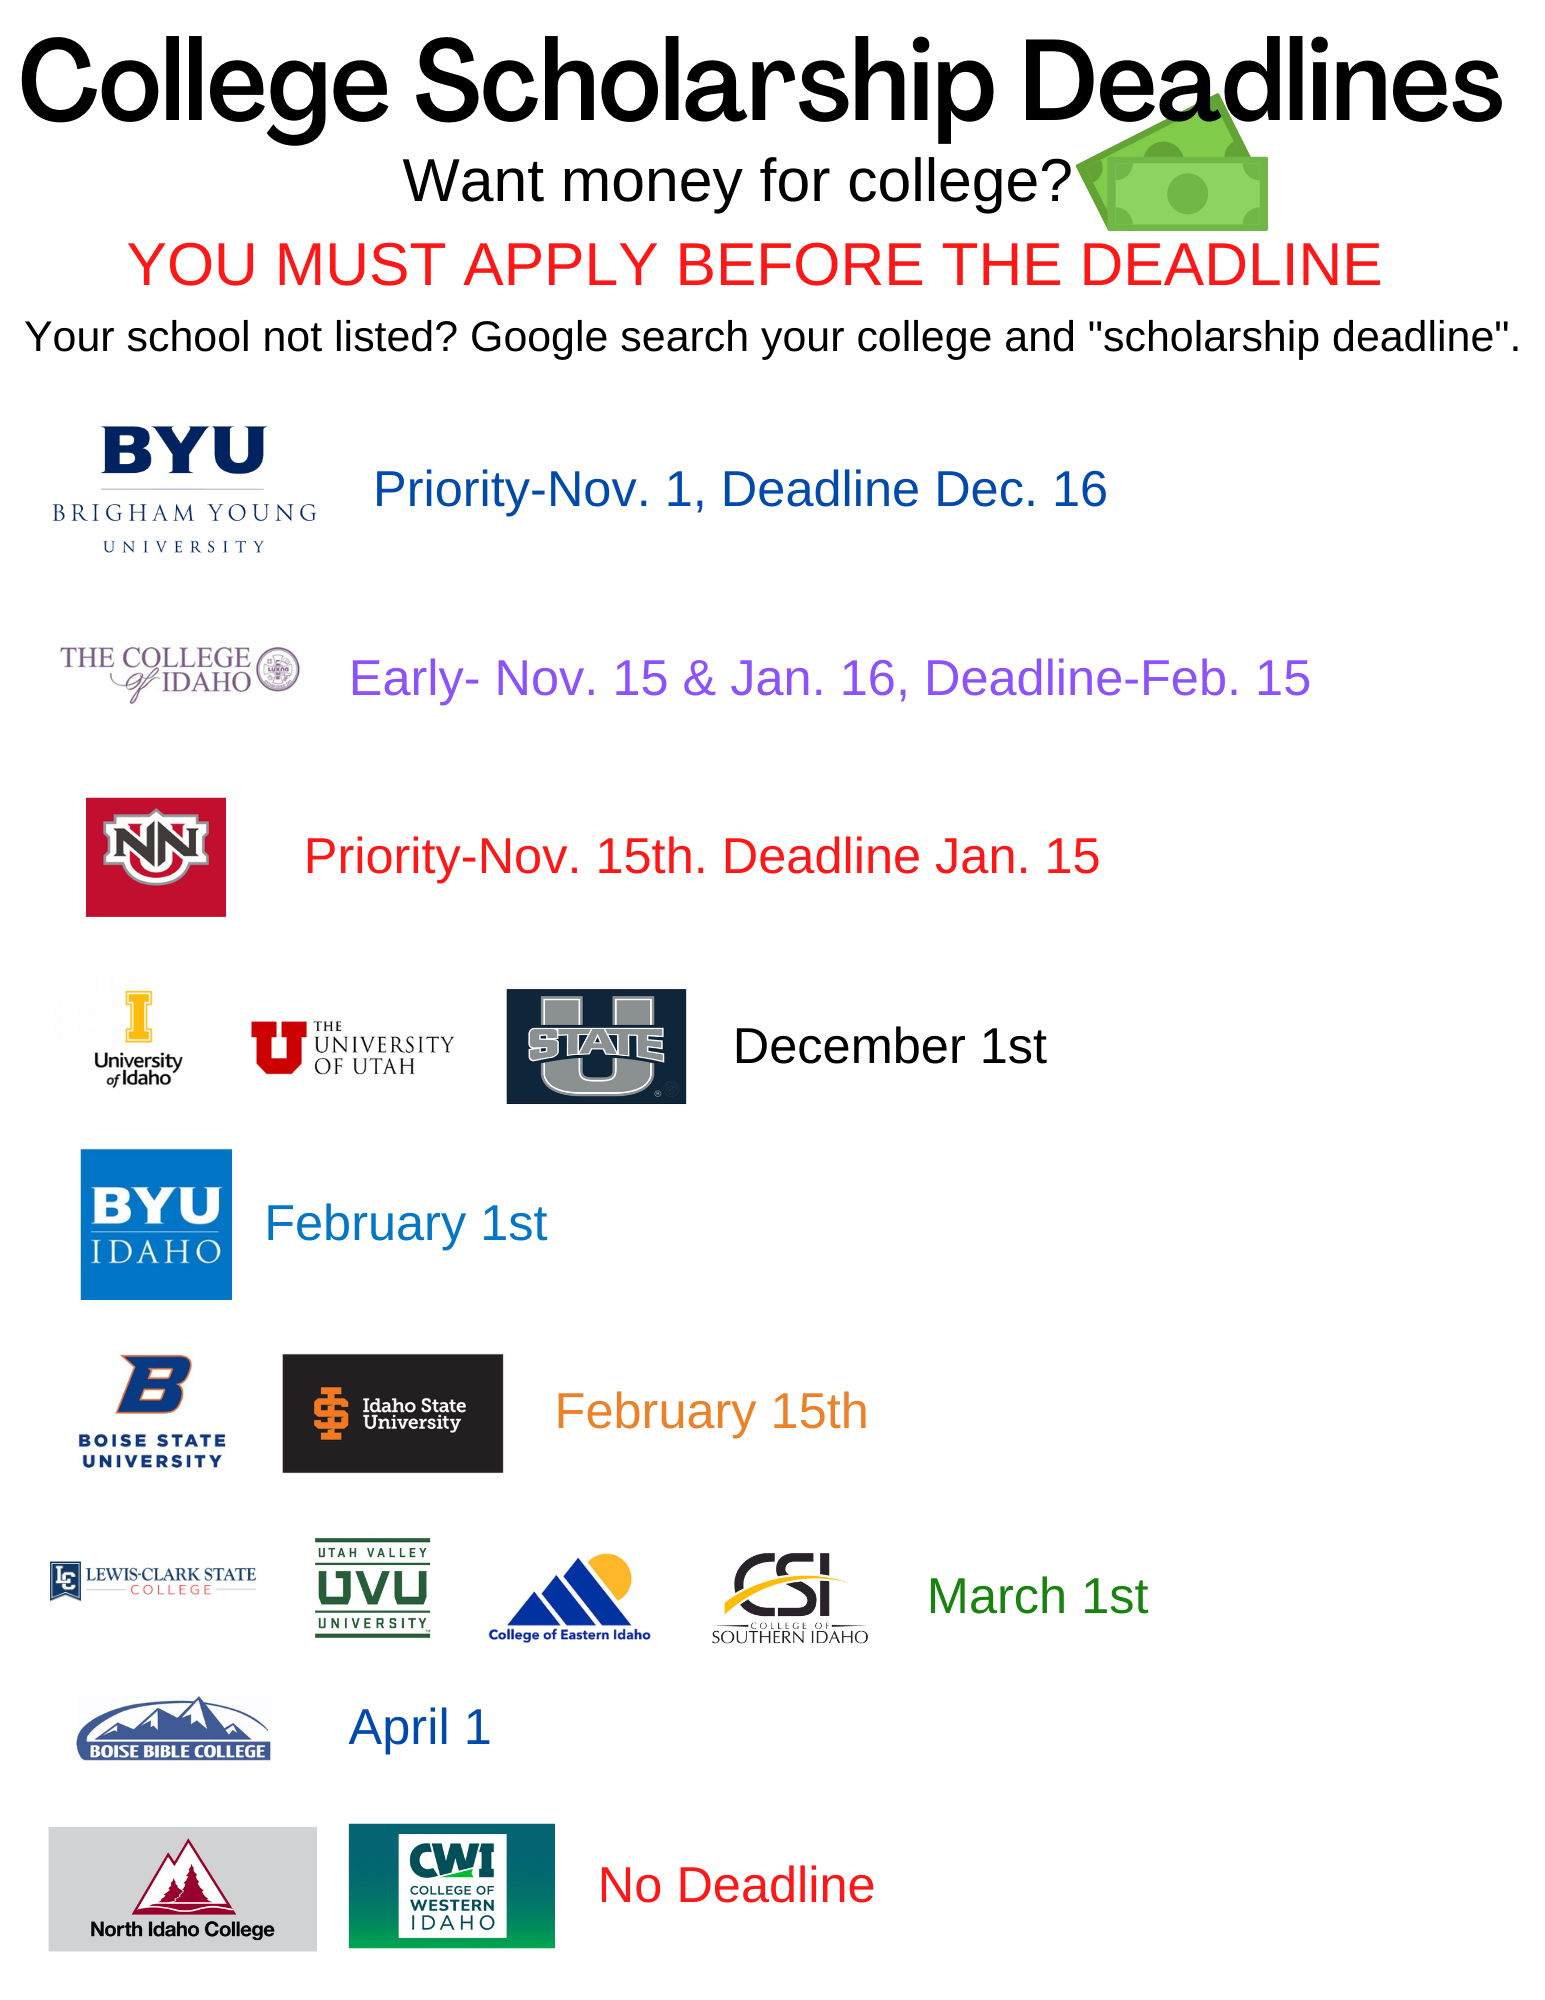 Apply for colleges before the scholarship deadlines! 